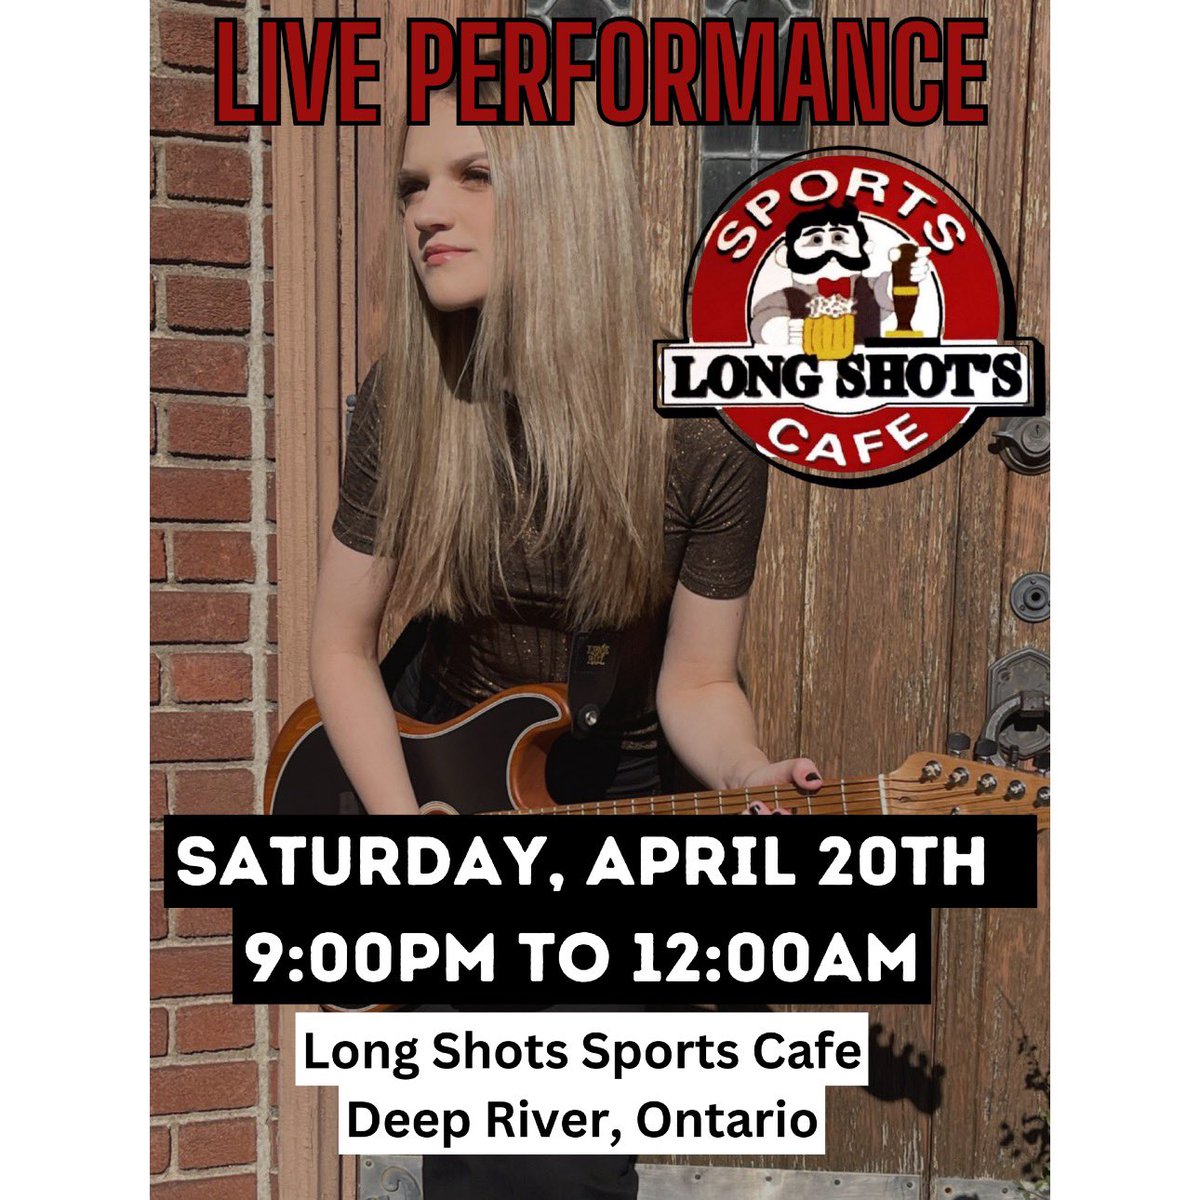 It’s been a while…I’m excited to be back performing LIVE at Long Shots Sports Cafe in Deep River this Saturday, April 20th from 9:00pm - 12:00am!🤘 Hope to see you there 🖤